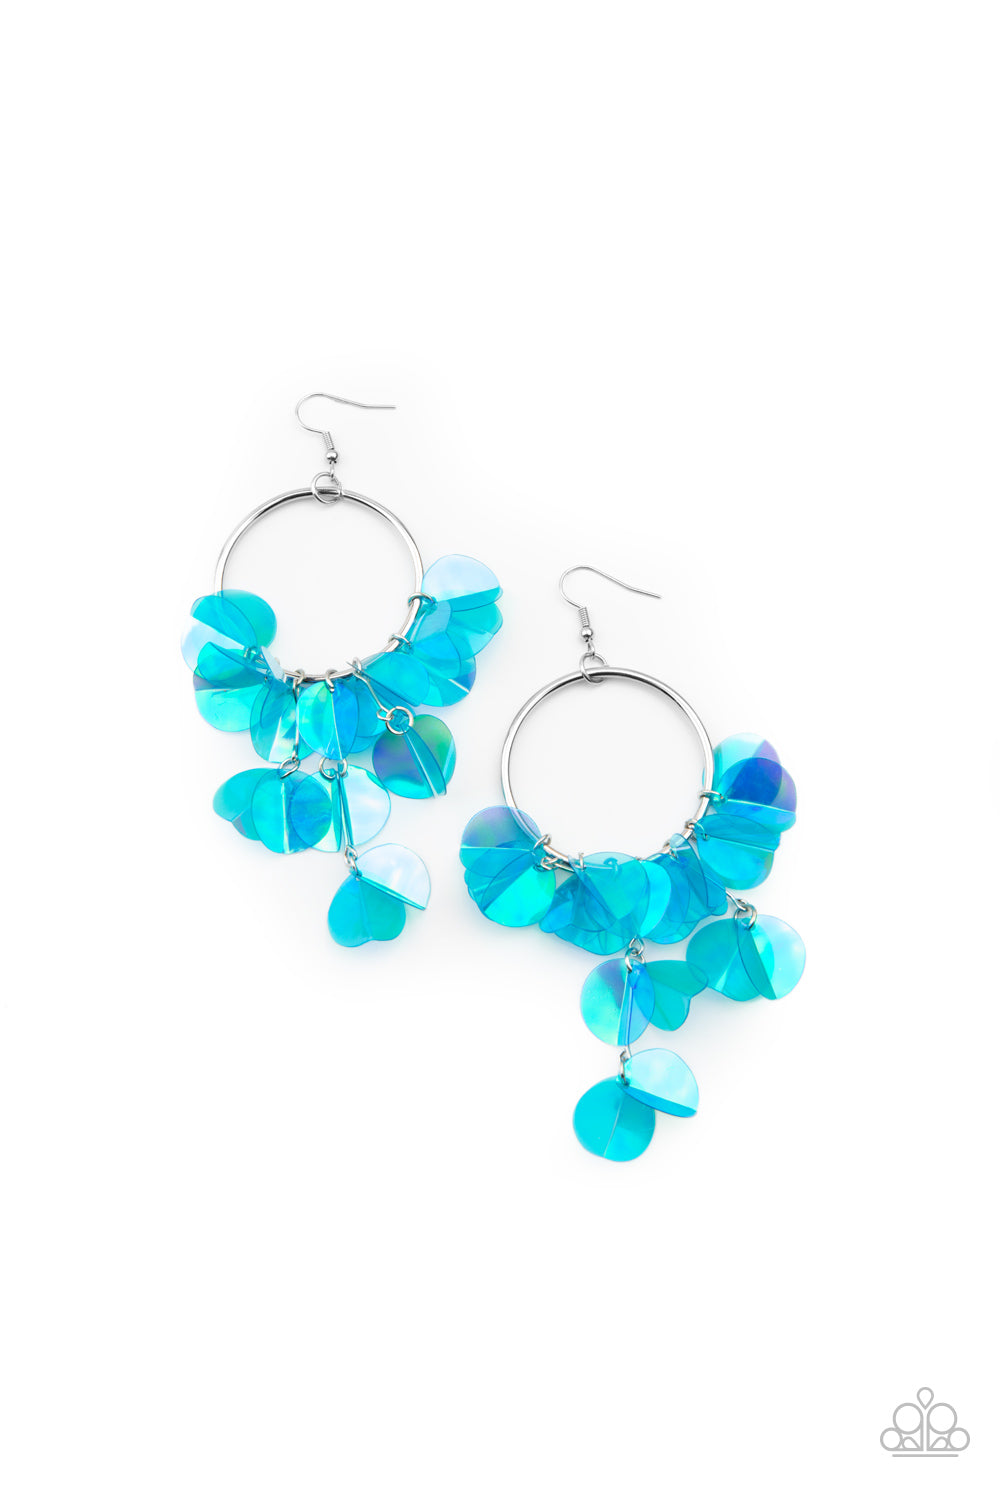 &lt;P&gt; Delicately folded in half, tassels of creased iridescent blue sequins swing from the bottom of a shiny silver hoop, creating an effervescent fringe. Earring attaches to a standard fishhook fitting.&lt;/P&gt;  

&lt;P&gt; &lt;I&gt;  Sold as one pair of earrings. &lt;/I&gt;  &lt;/P&gt;


&lt;img src=\&quot;https://d9b54x484lq62.cloudfront.net/paparazzi/shopping/images/517_tag150x115_1.png\&quot; alt=\&quot;New Kit\&quot; align=\&quot;middle\&quot; height=\&quot;50\&quot; width=\&quot;50\&quot;/&gt;